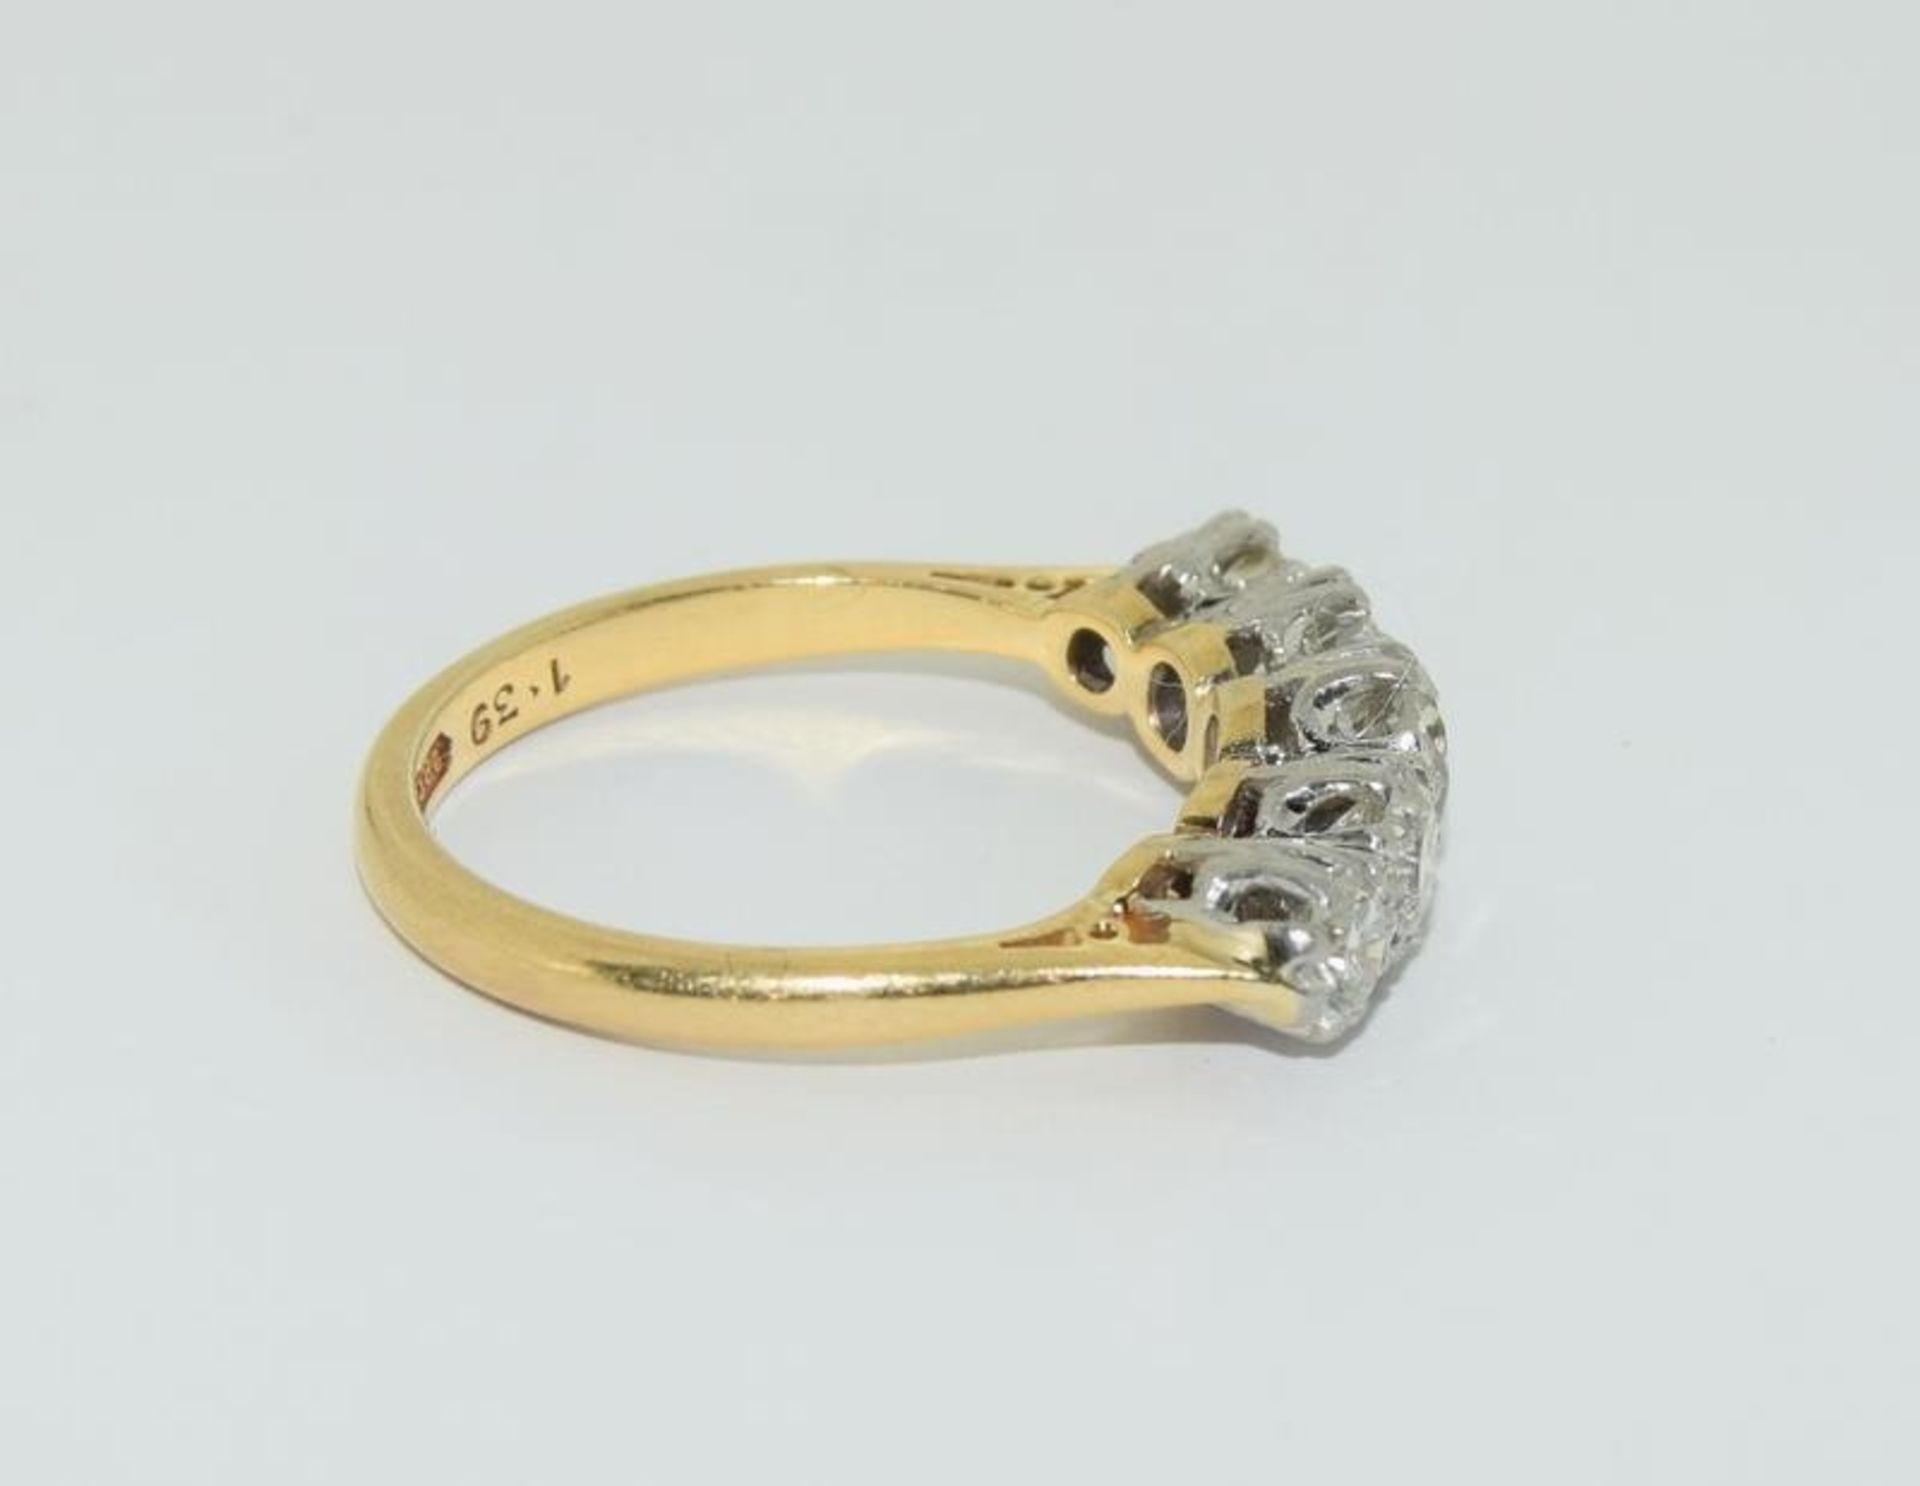 18ct gold and platinum 5 stone diamond ring hallmarked in ring as 1.39ct diamond value size N - Image 2 of 5